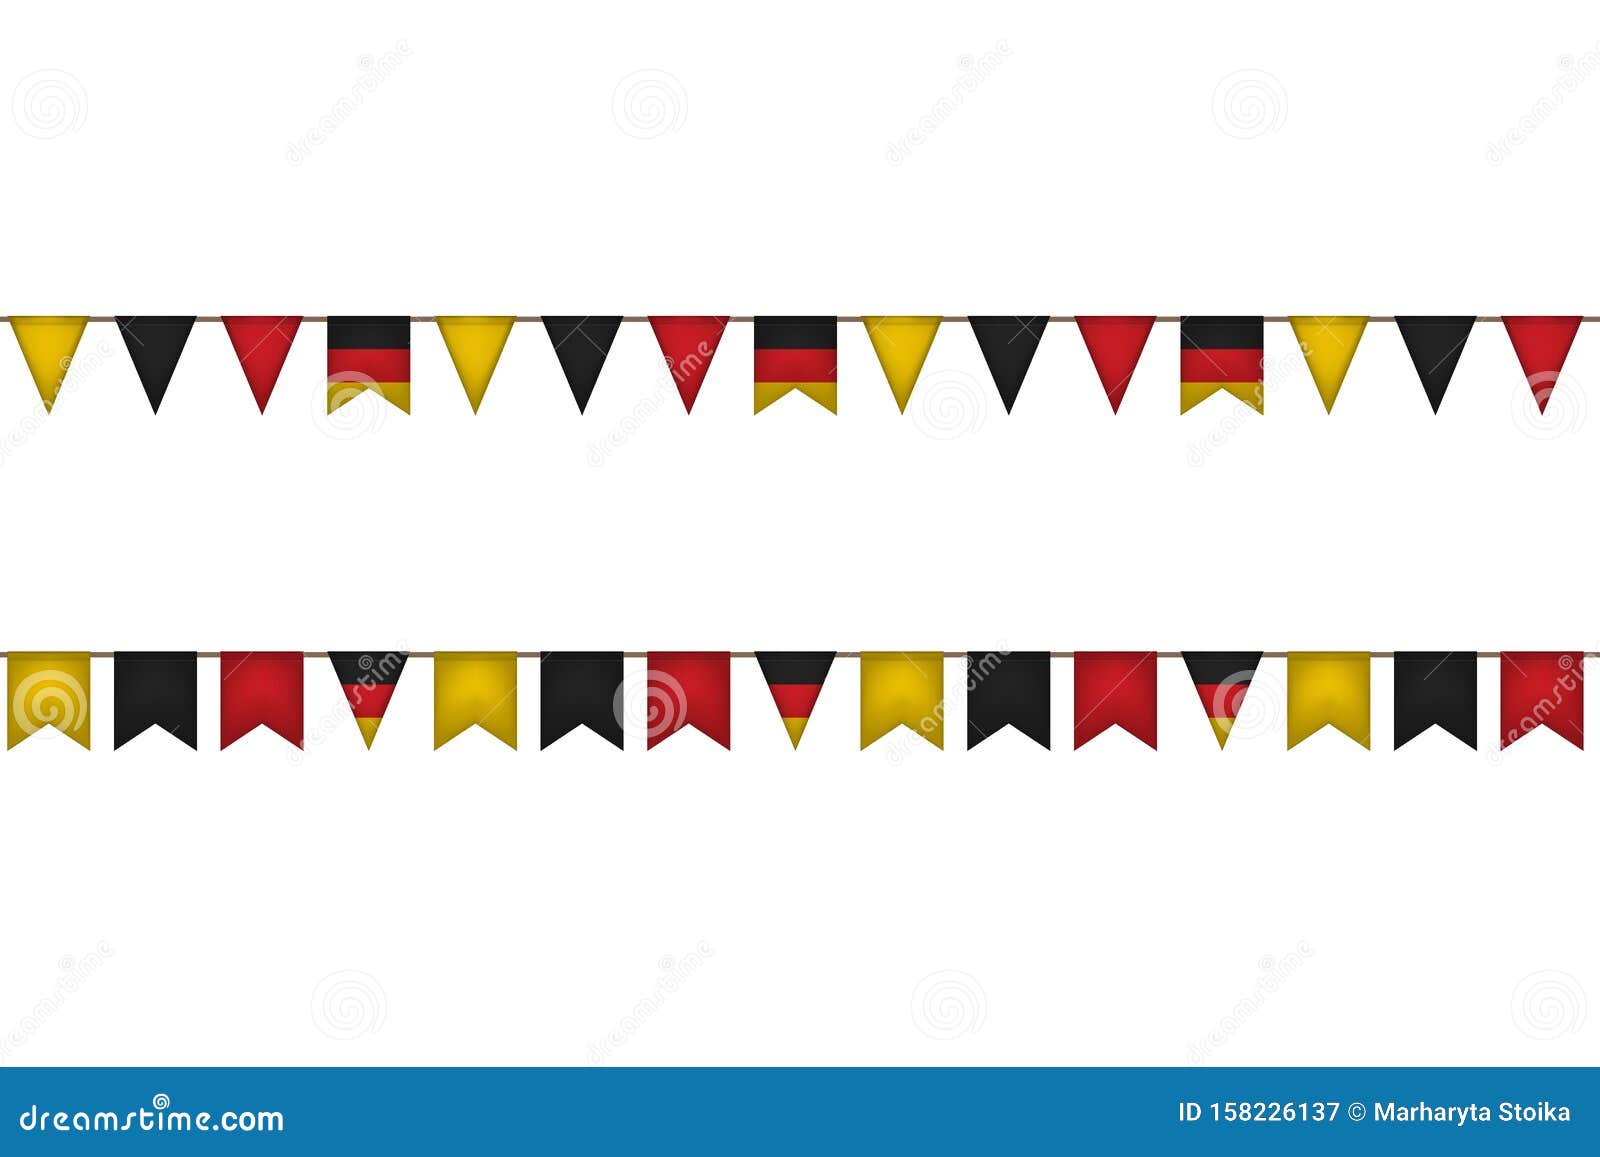 Germany Garland with Flags. Stock Vector - Illustration of germany ...